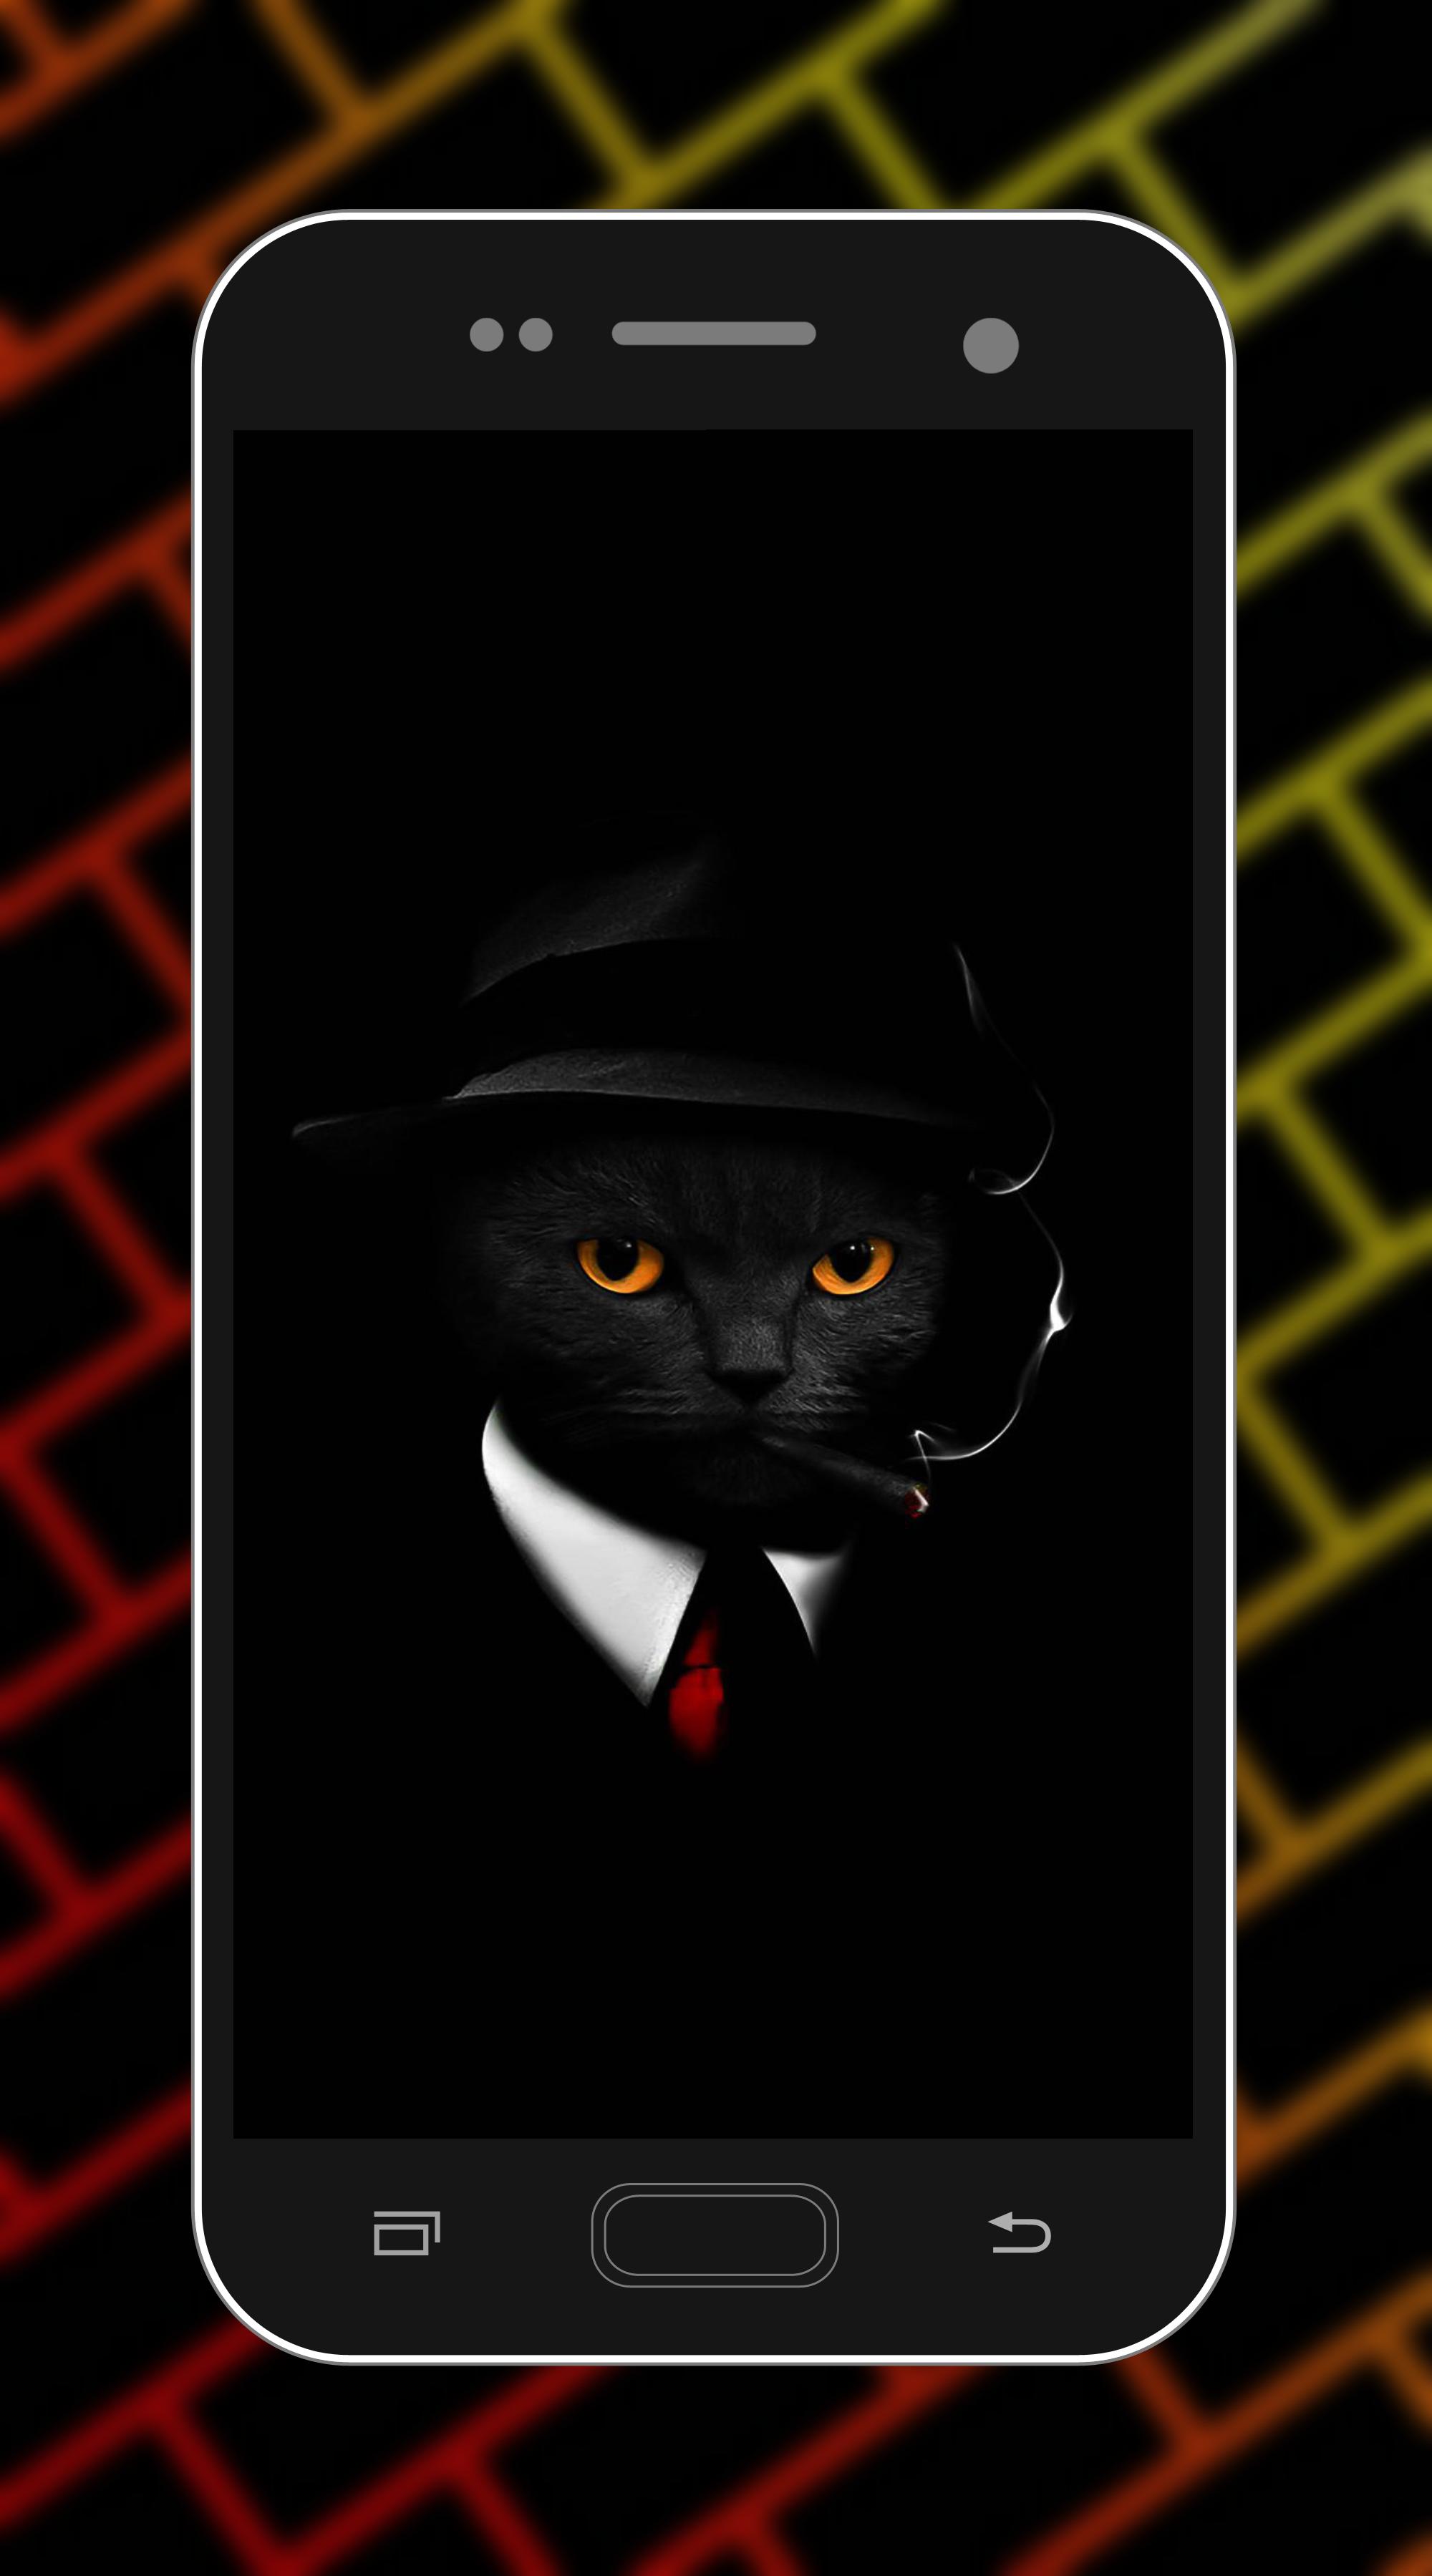 Dark 4K Wallpapers for Android - APK Download